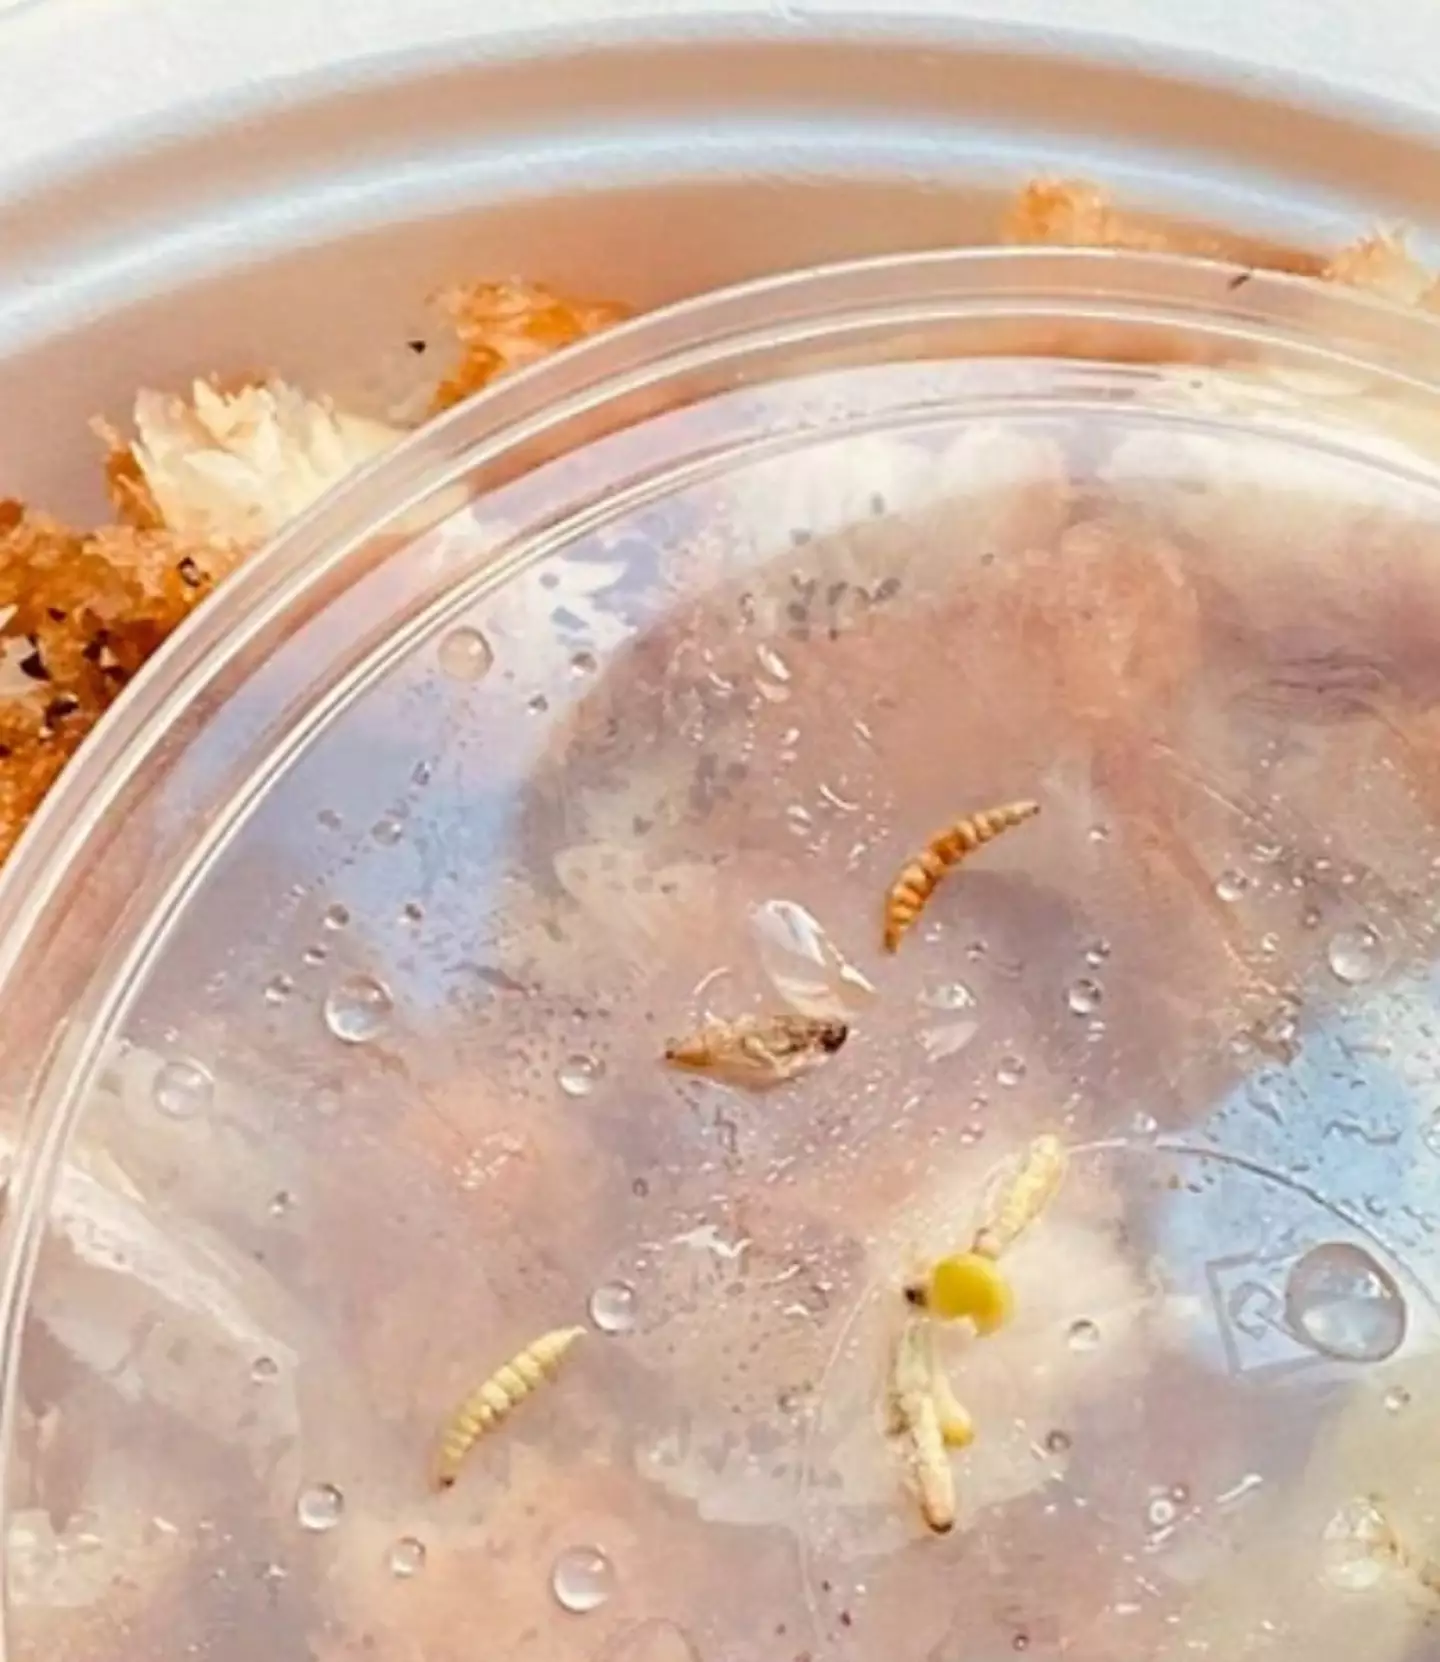 Maggots have reportedly been found in meals.